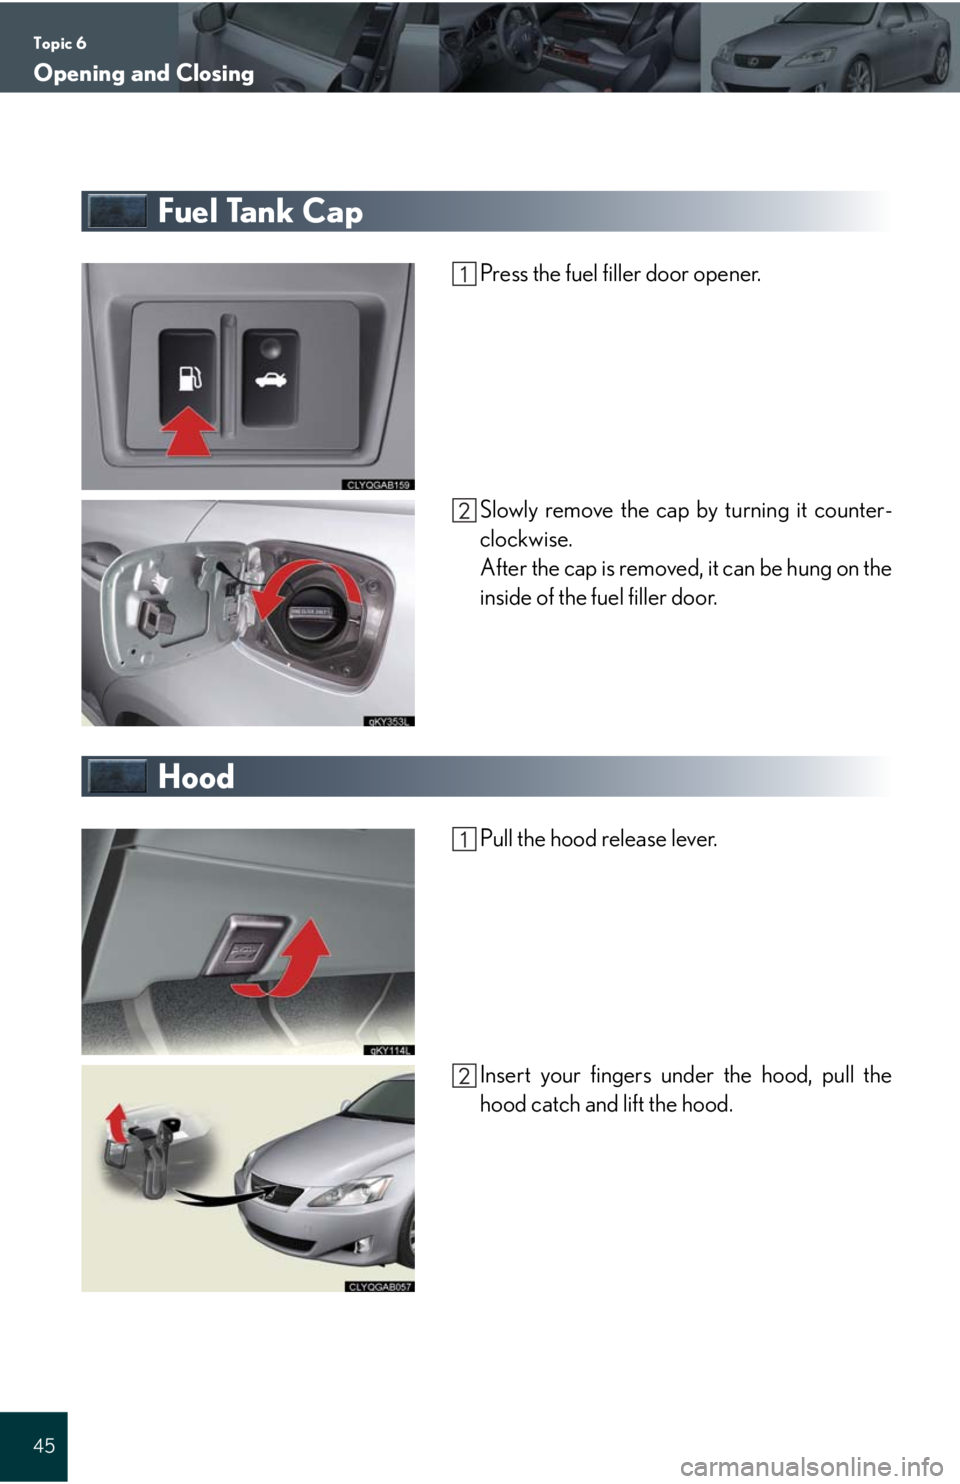 Lexus IS250 2008  Audio/video System / LEXUS 2008 IS 350/250 QUICK GUIDE OWNERS MANUAL (OM60D81U) Topic 6
Opening and Closing
45
Fuel Tank Cap
Press the fuel filler door opener.
Slowly remove the cap by turning it counter-
clockwise.
After the cap is removed, it can be hung on the
inside of the fu